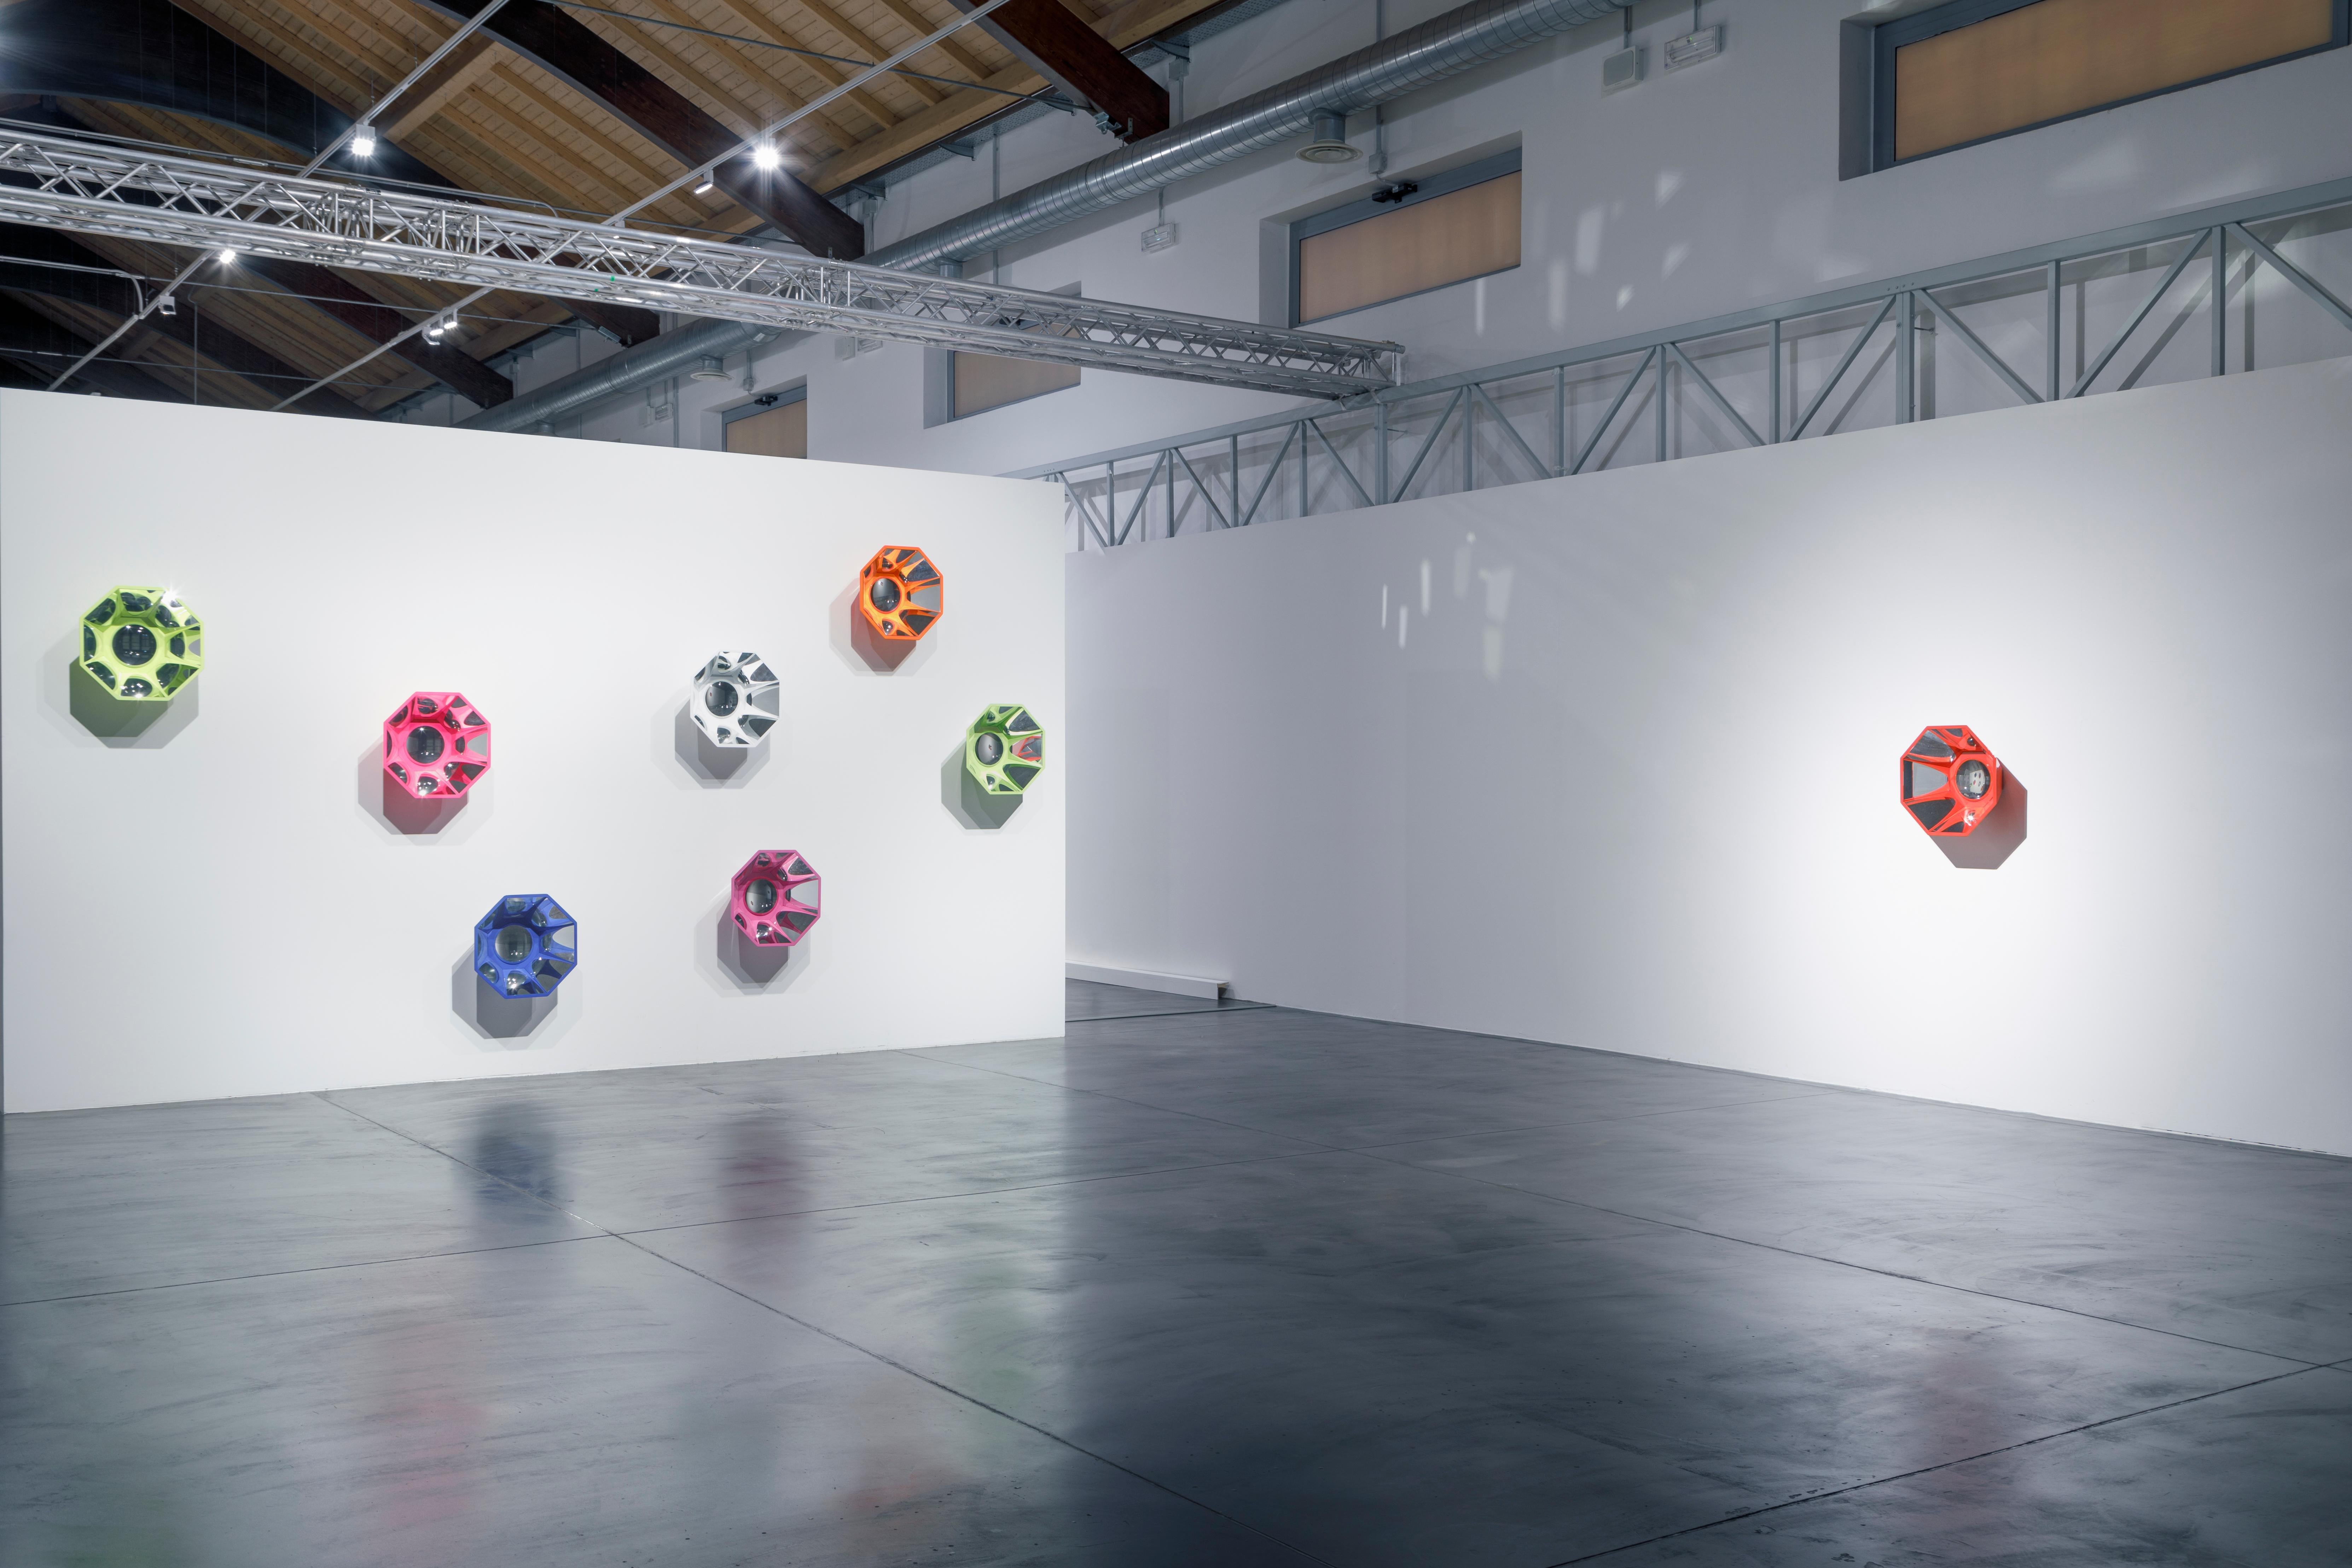 Chiara Dynys returns to deceive the viewer through optical devices capable of fragmenting, altering and disorienting the perception of vision. Kaleidos (2020) is a series of sculptures of different colors, kaleidoscopic in shape and composed of